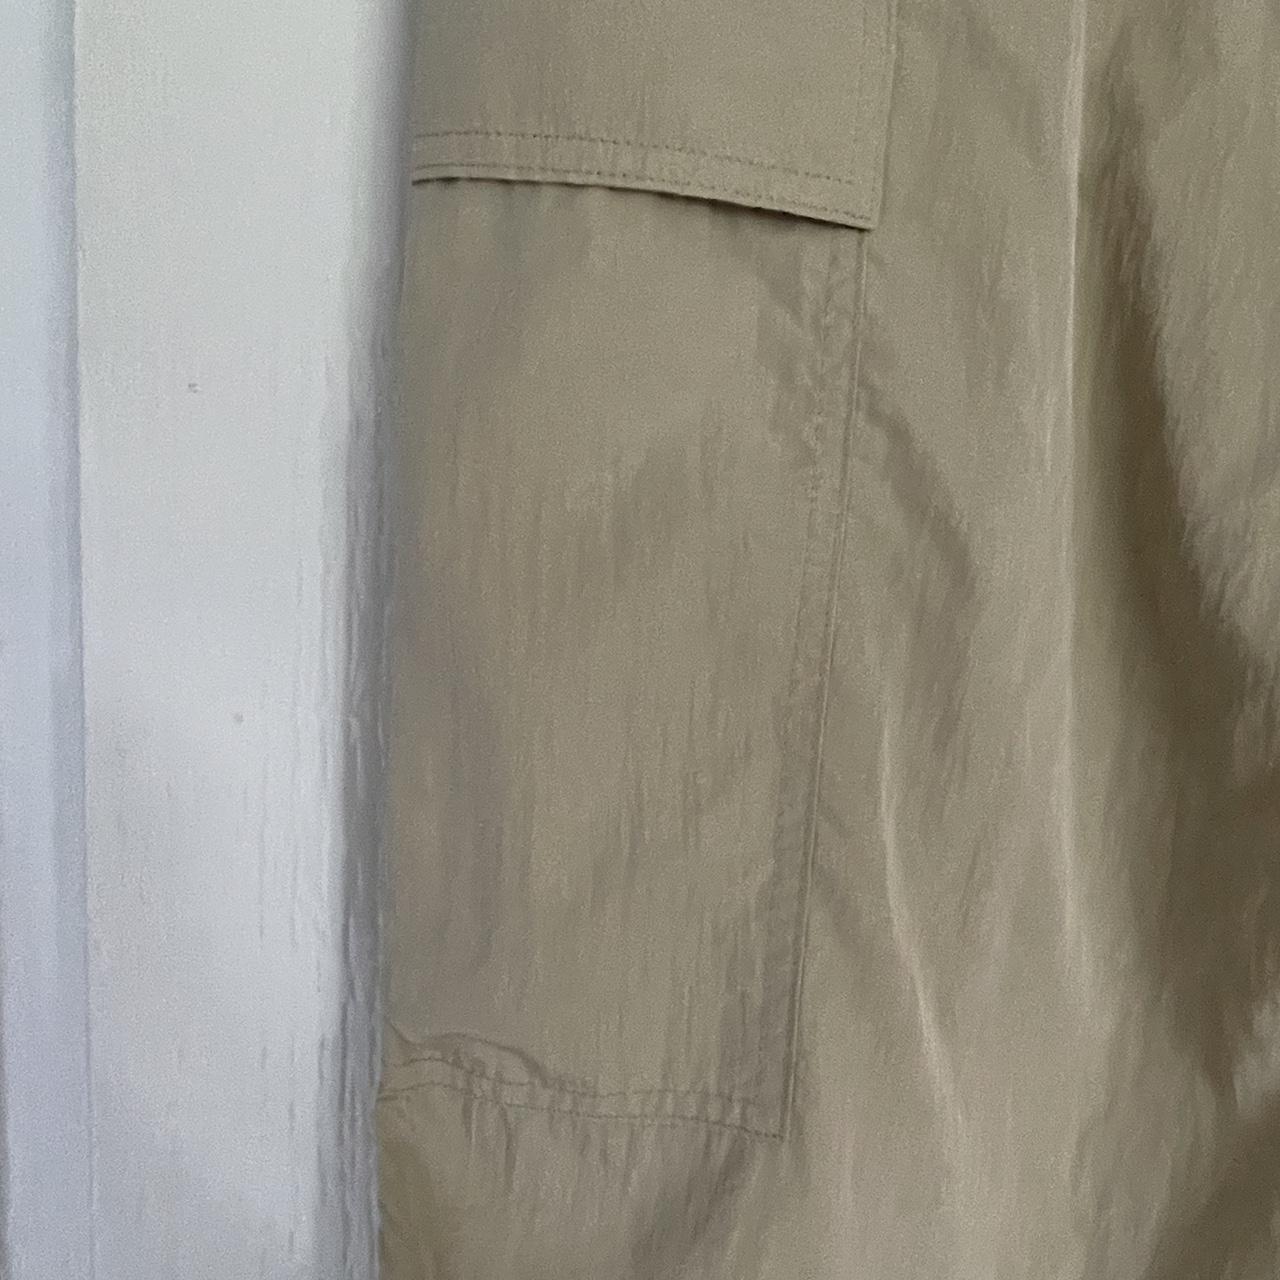 Women's Pants for sale in Pokhara | Facebook Marketplace | Facebook